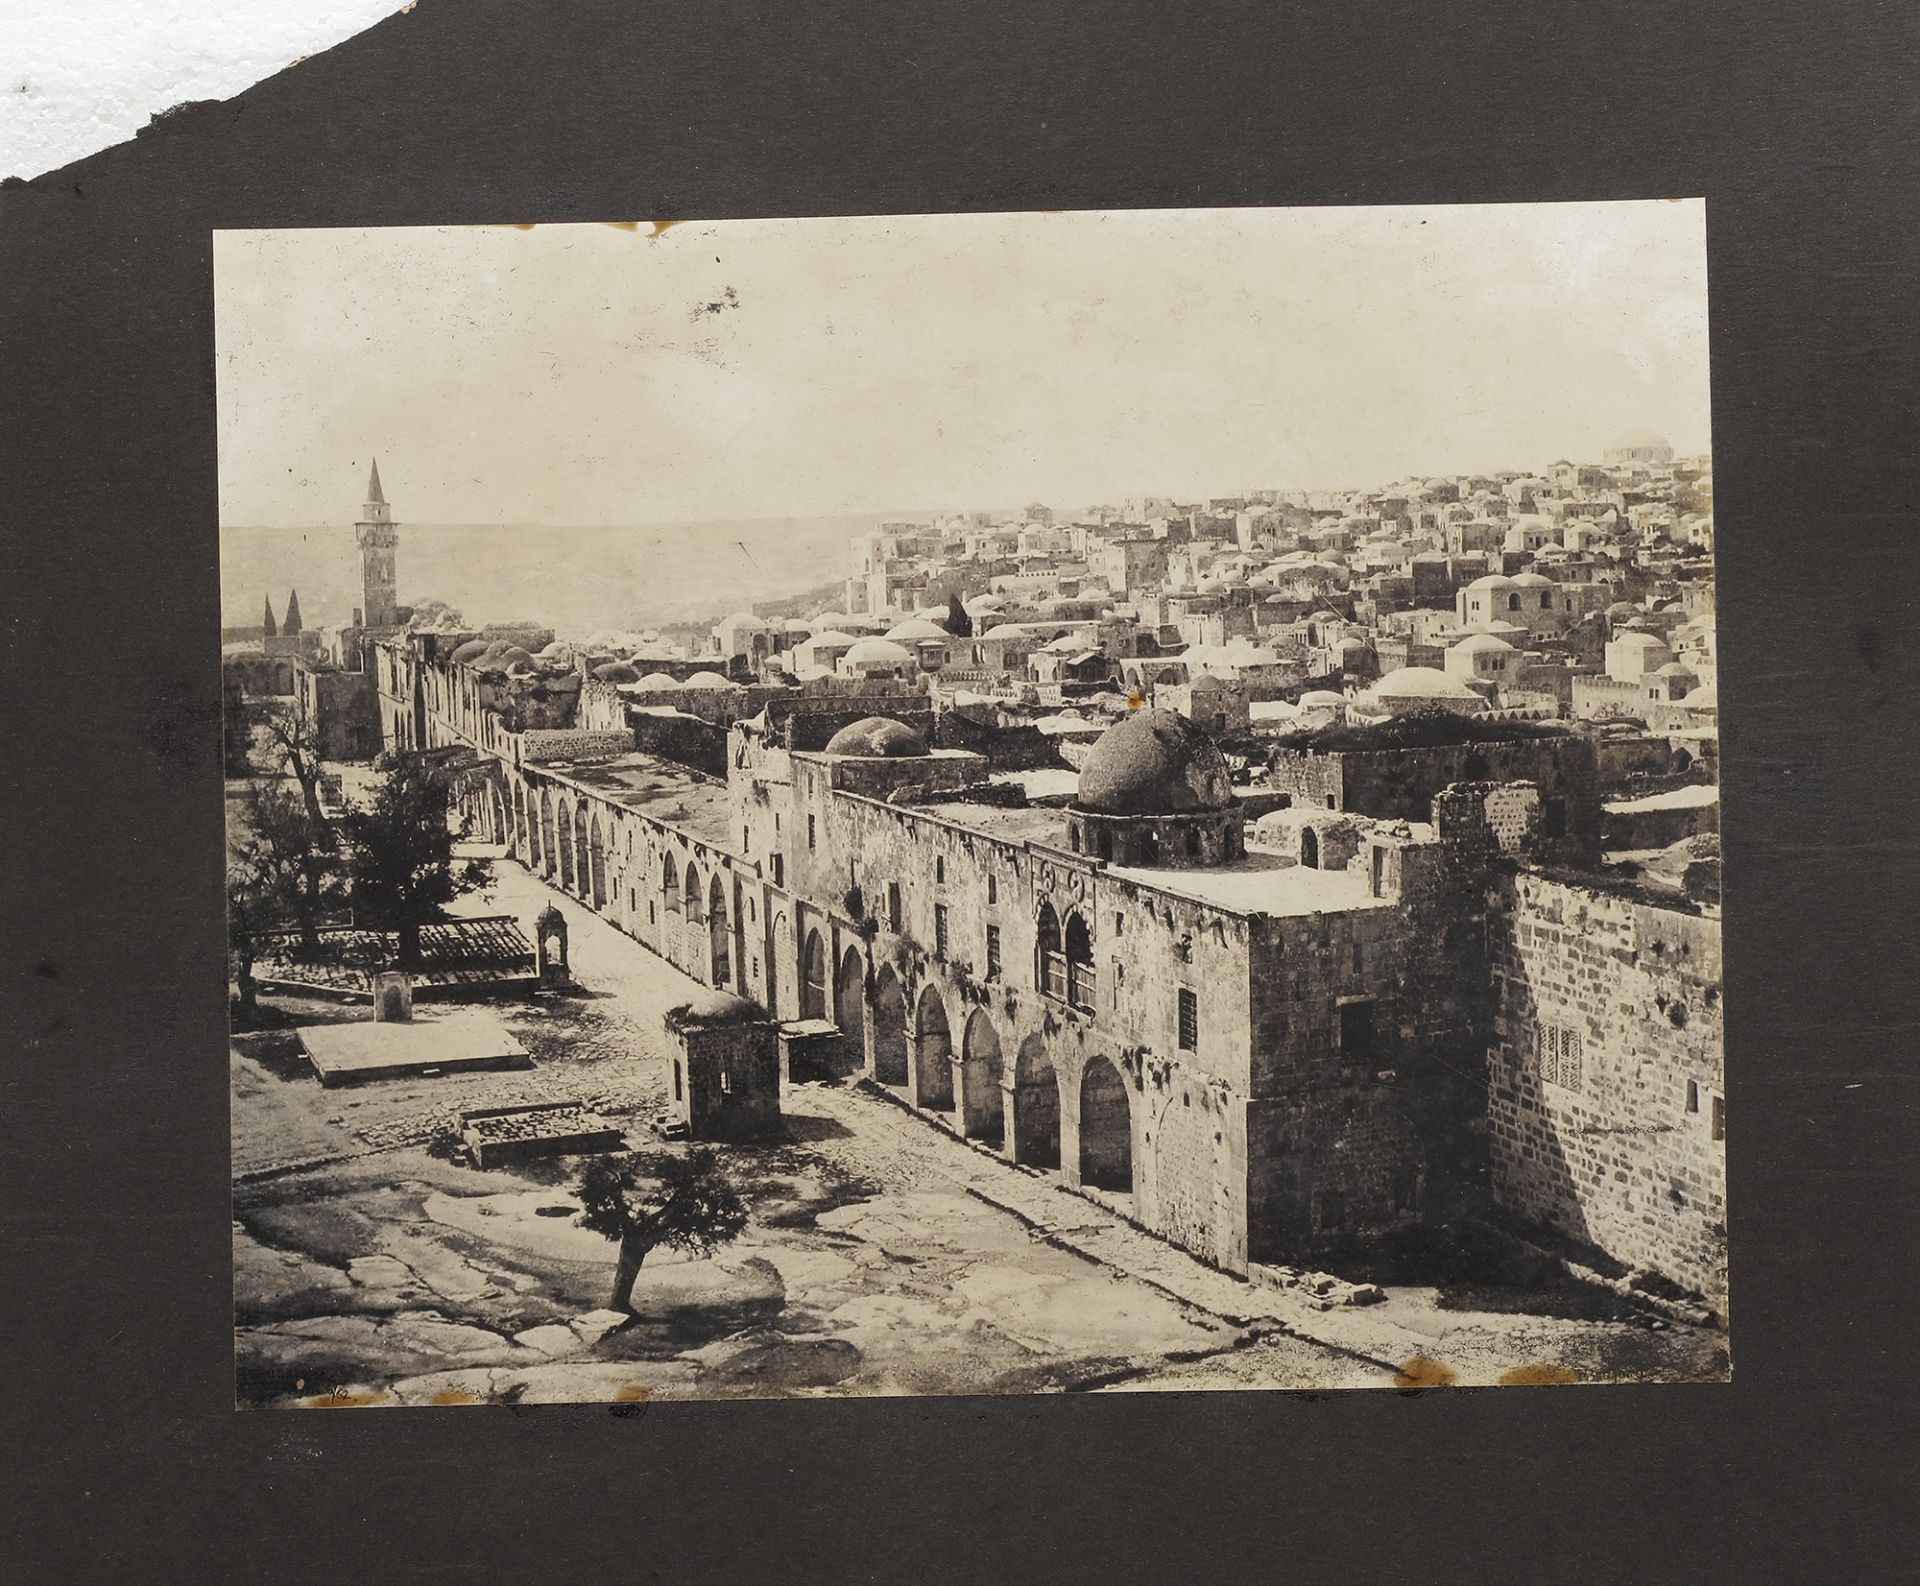 MECCA AND MEDINA, A COLLECTION OF 14 PHOTOGRAPHS DURING THE HAJJ, EARLY 20TH CENTURY - Image 15 of 15